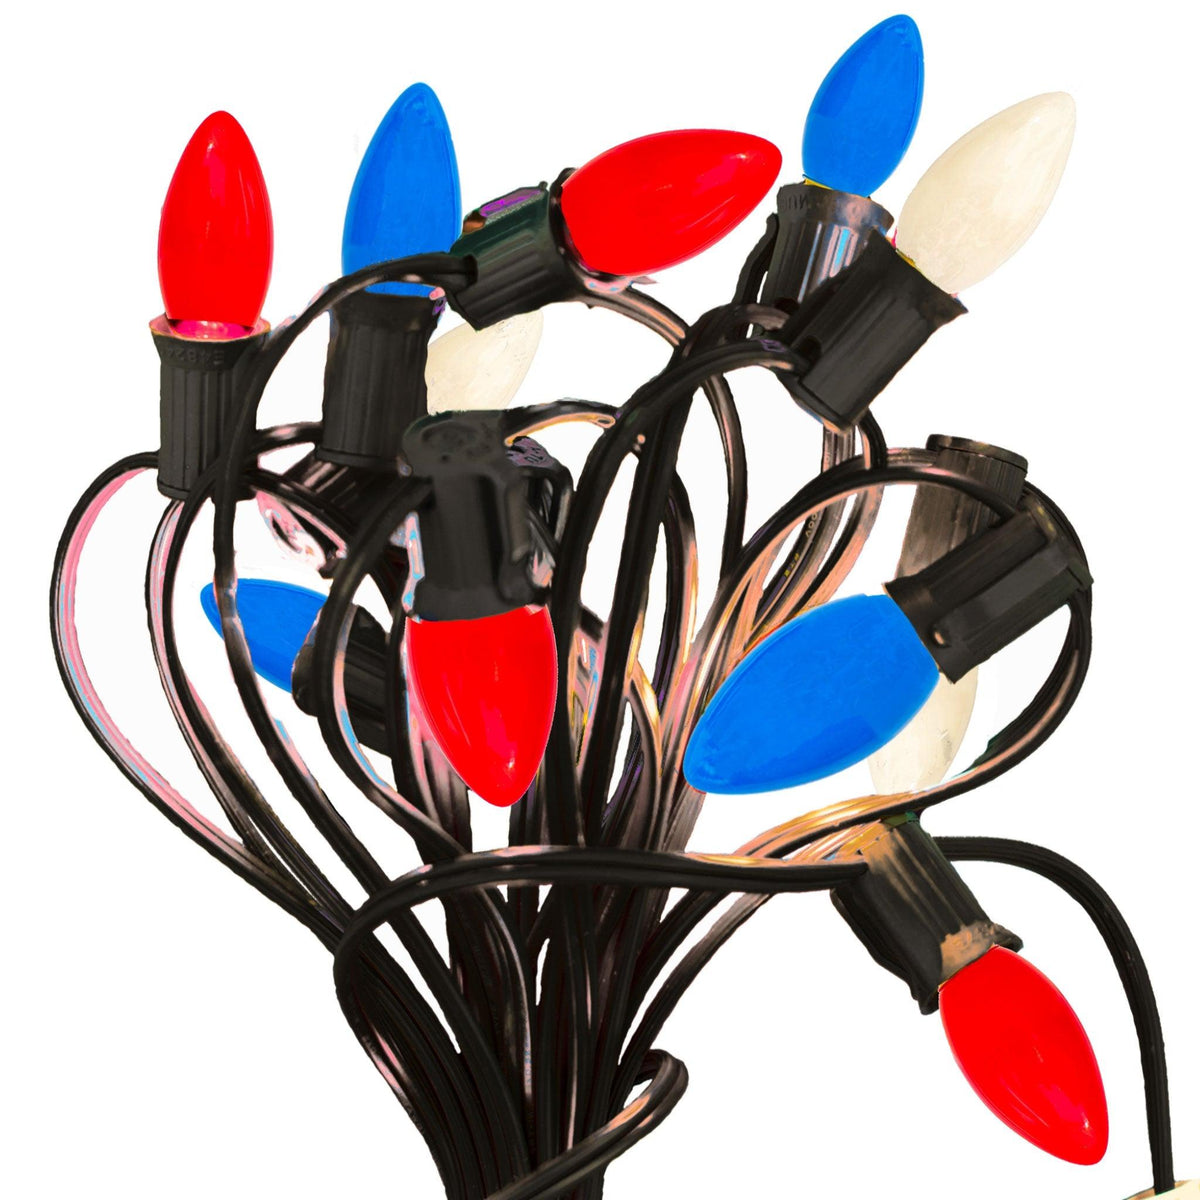 Lee Display offers your favorite Multi-Color 4th of July Red, White and Blue Lights sold with a 25FT Patio String Cord in a set!  On sale now at leedisplay.com